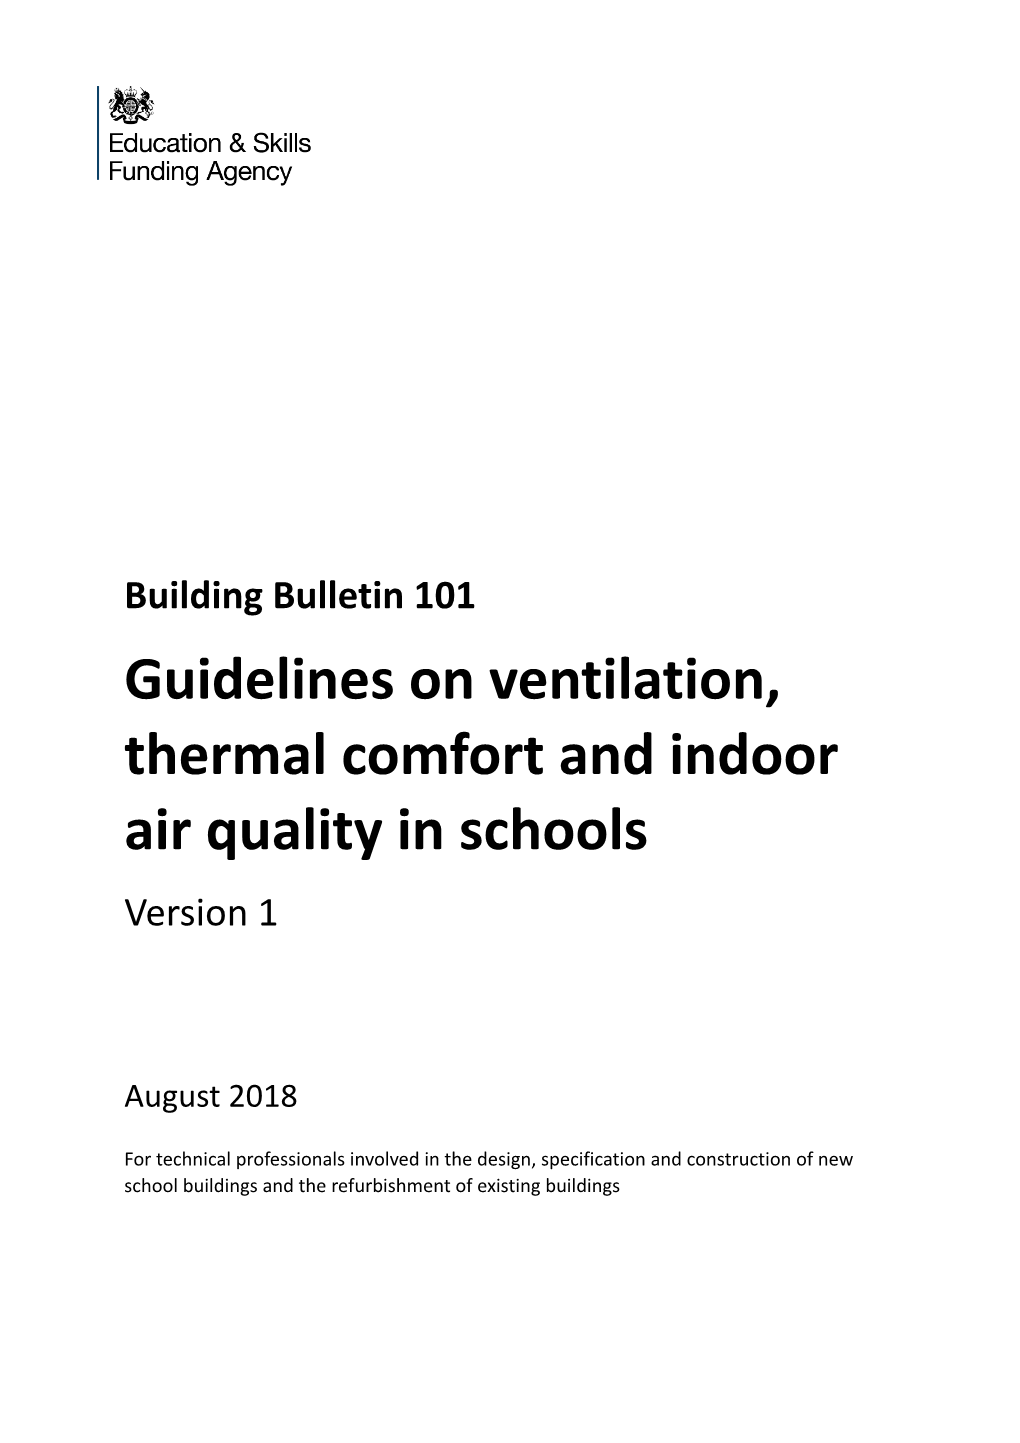 Guidelines on Ventilation, Thermal Comfort and Indoor Air Quality in Schools